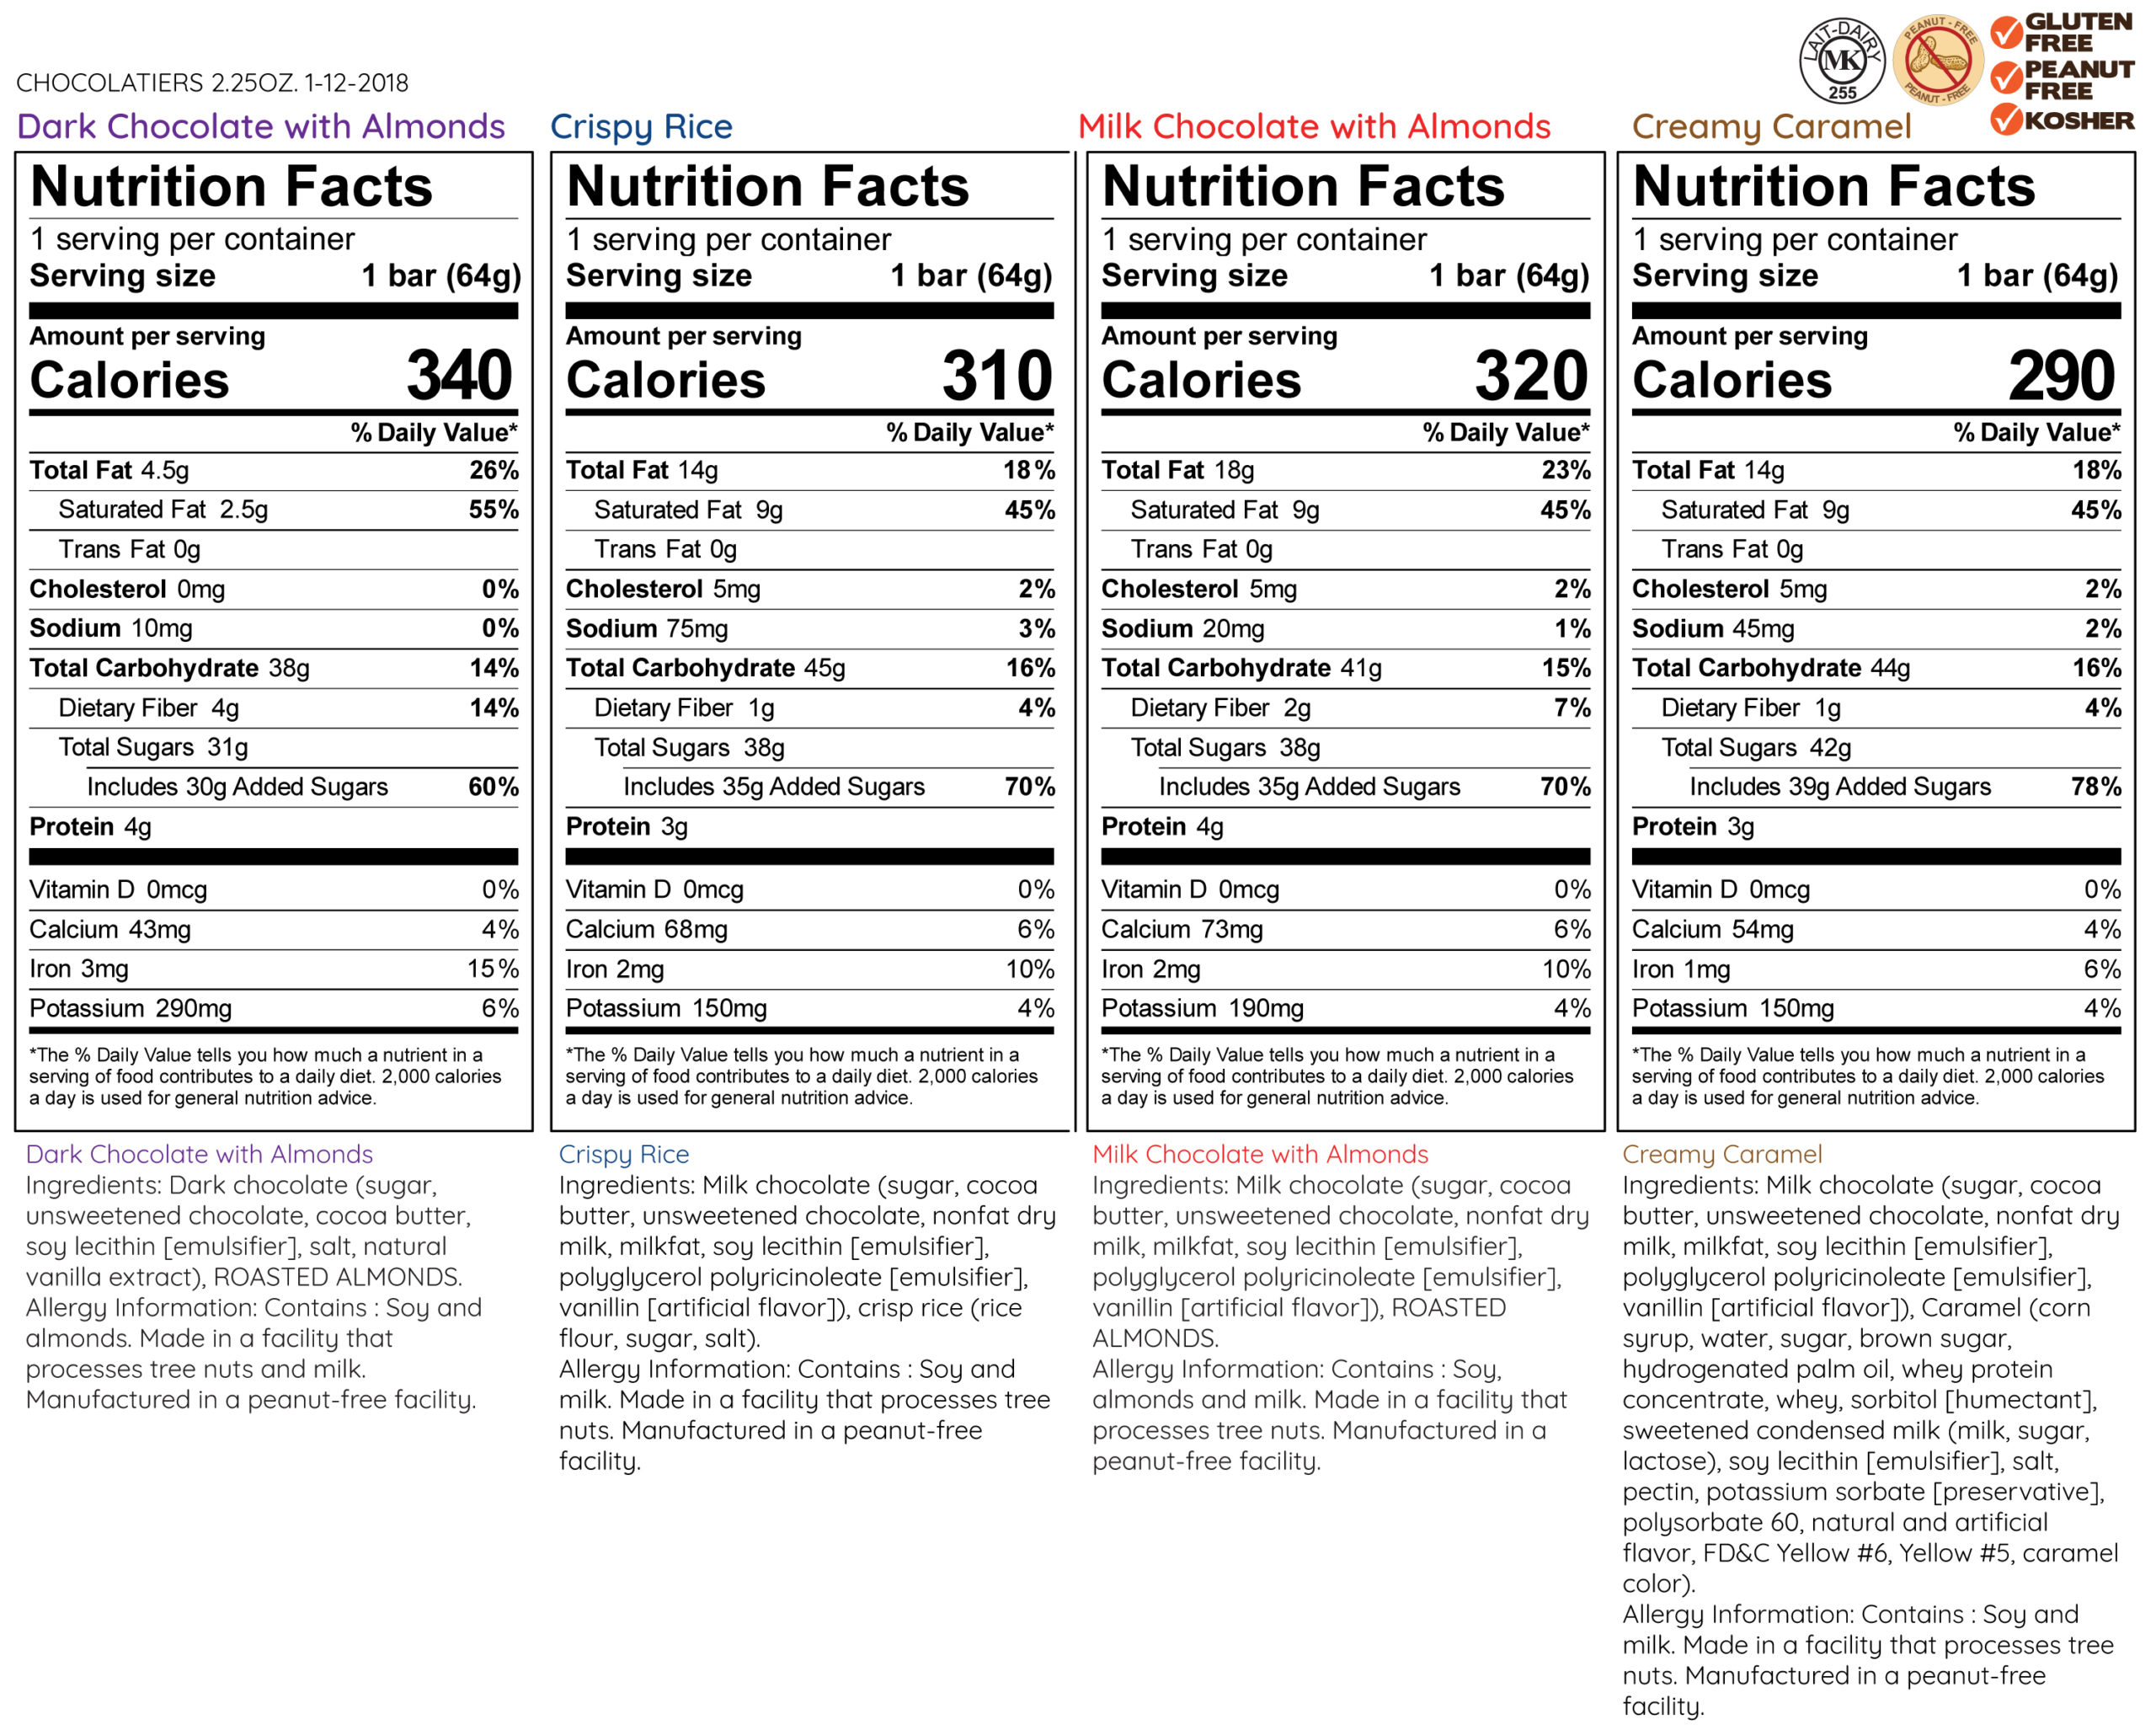 Chocolatiers-2.25oz-Ingredients-and-Nutrition-Facts